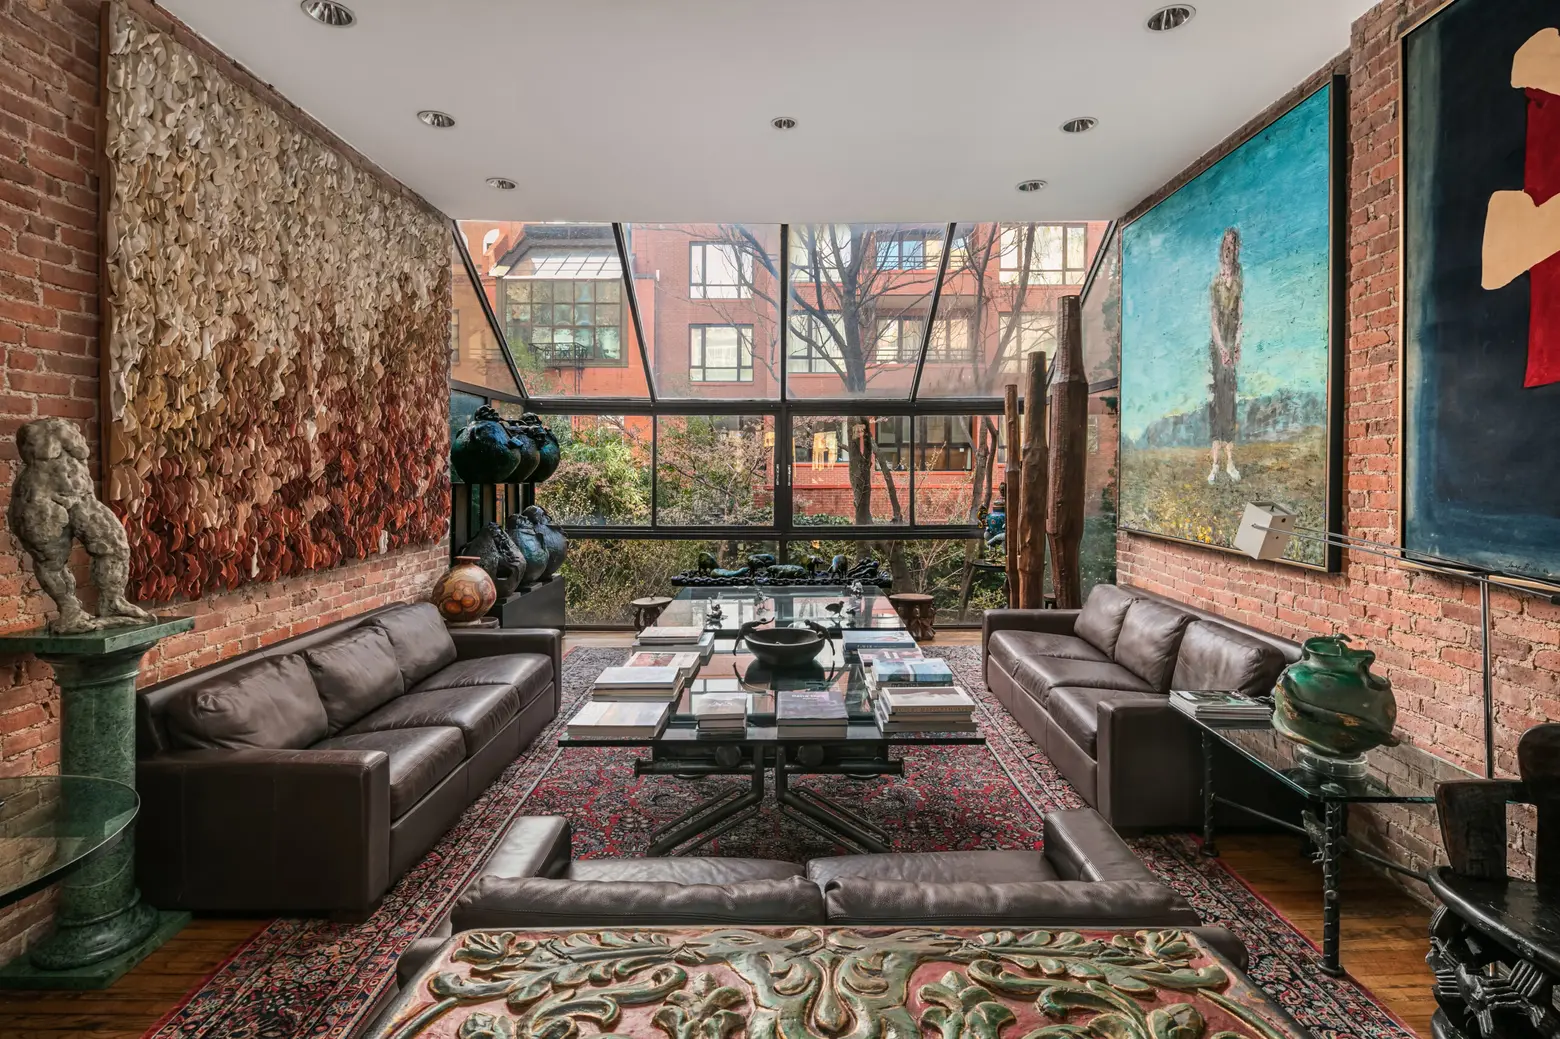 An international artist couple asks $38M for their art-filled UES townhouse–Rolls Royce included